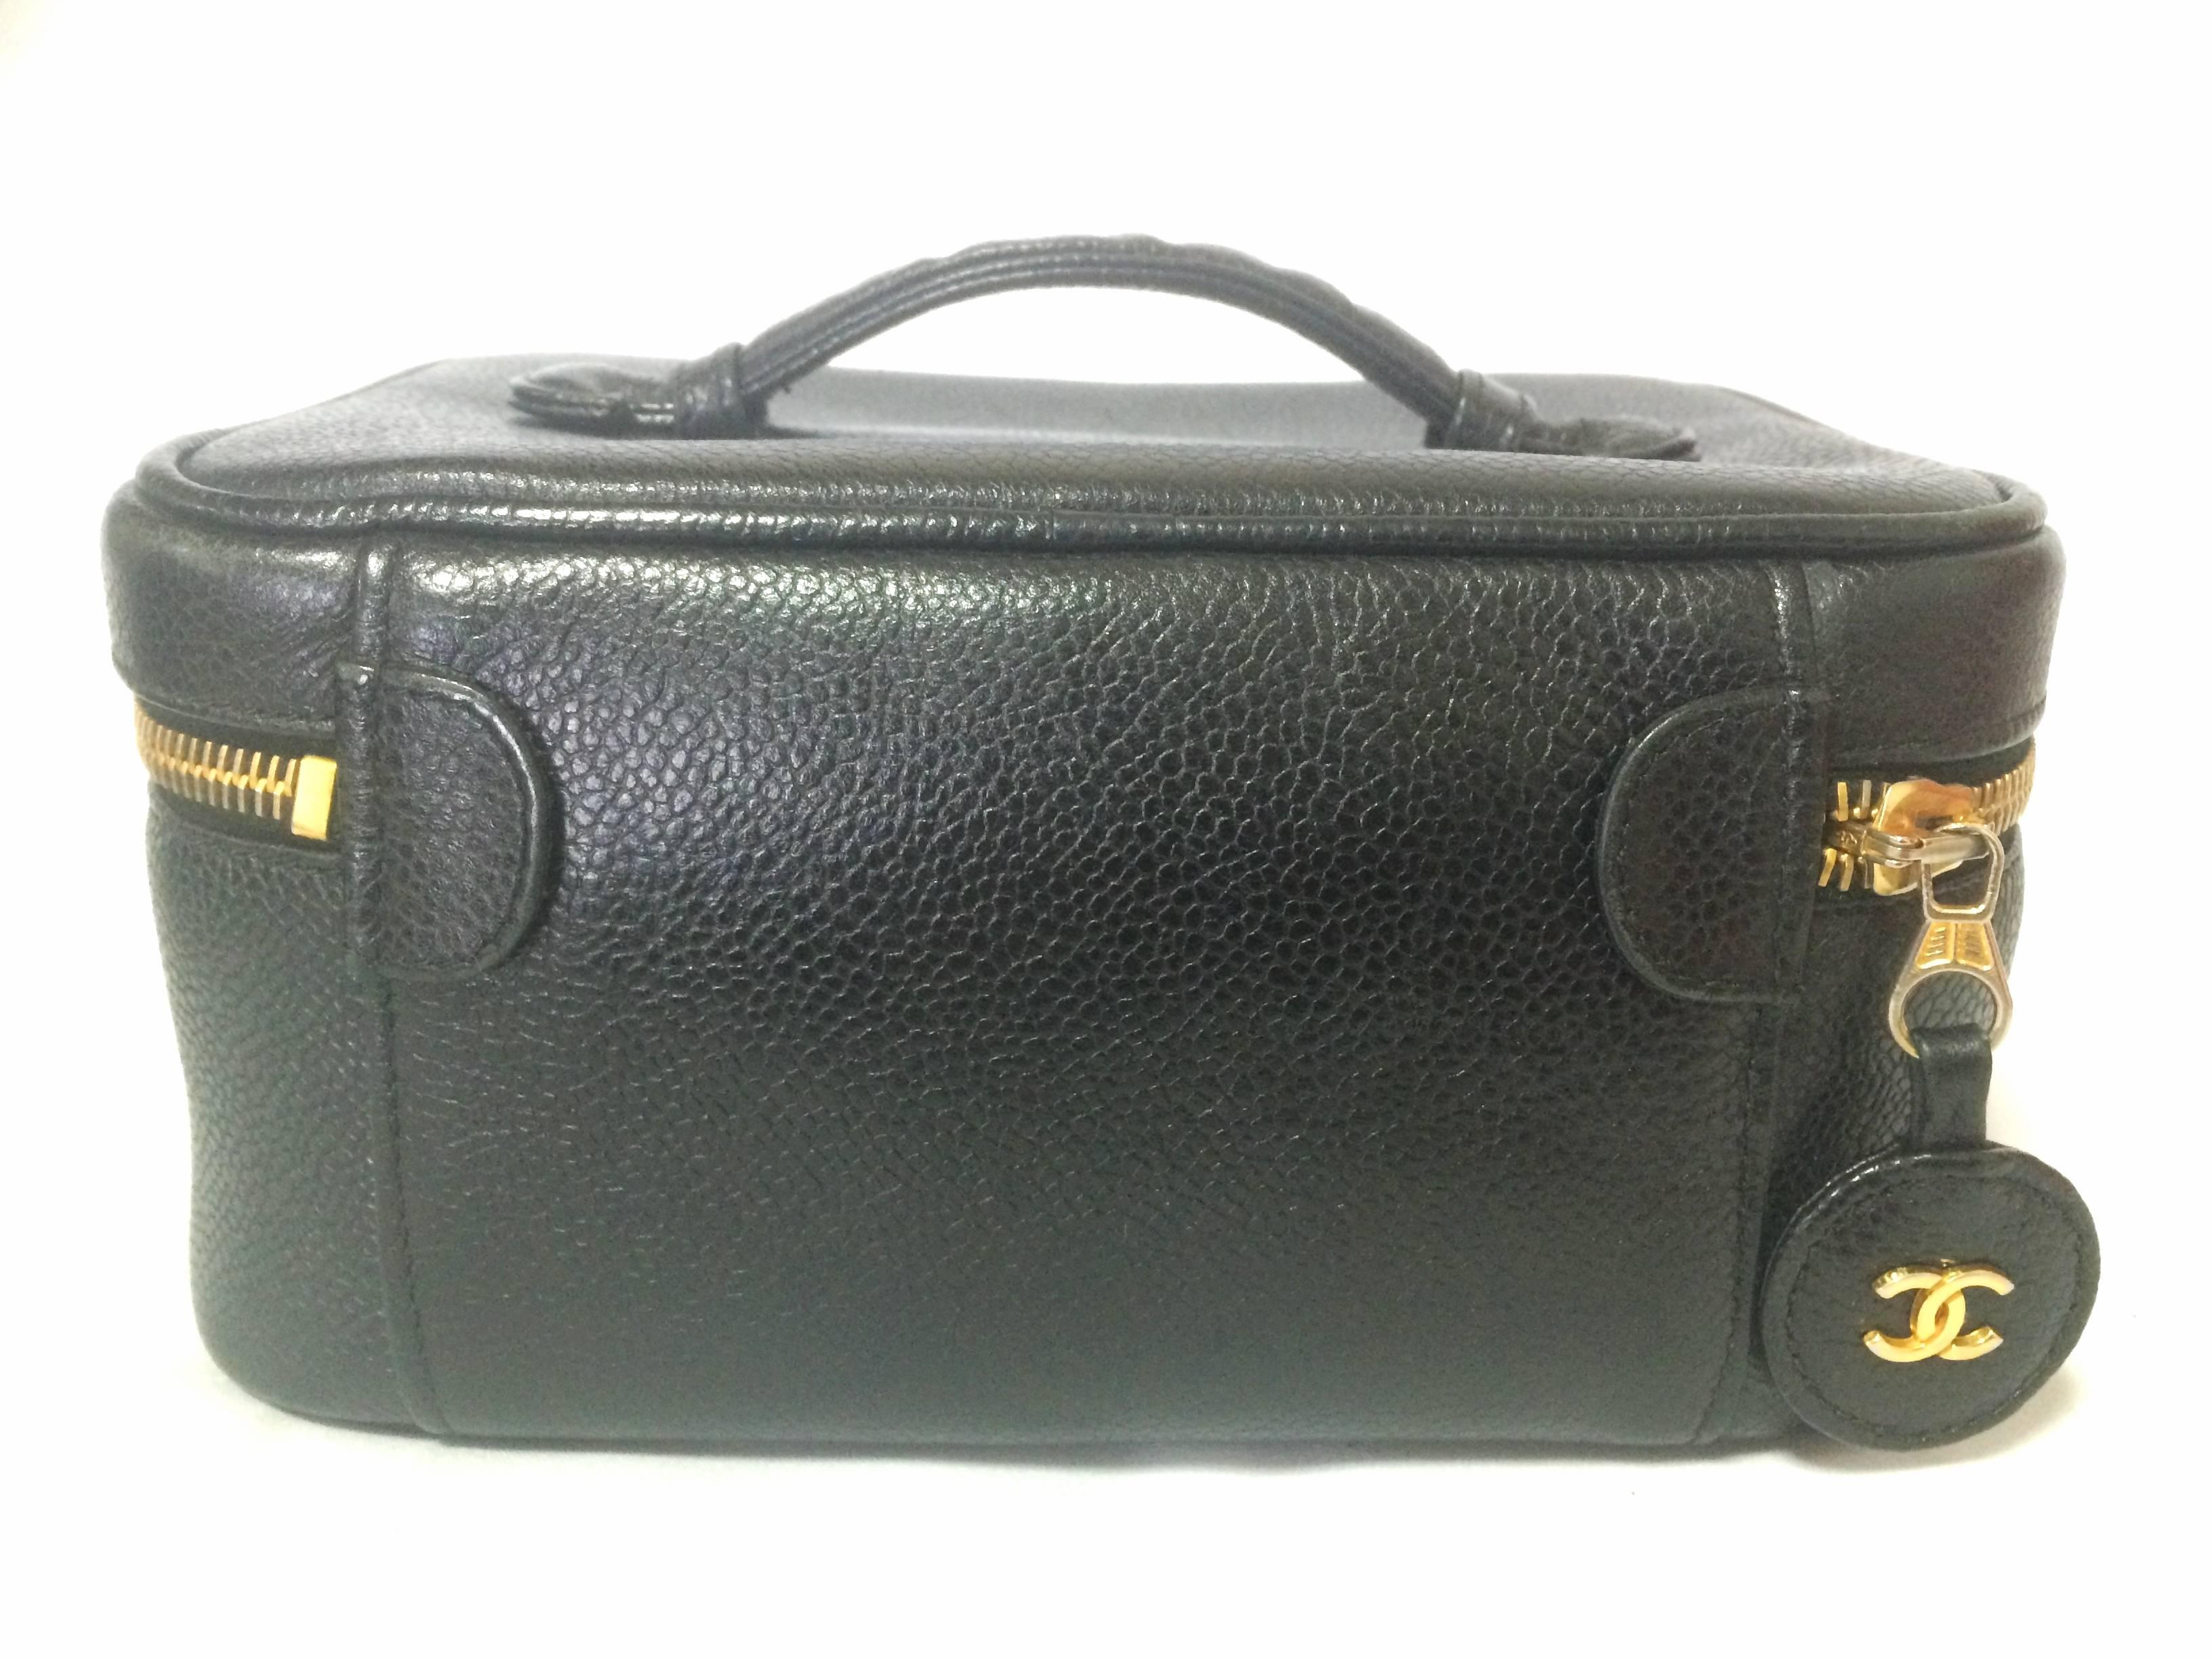 Black Vintage CHANEL caviarskin cosmetic and toiletry black purse. Classic vanity bag.